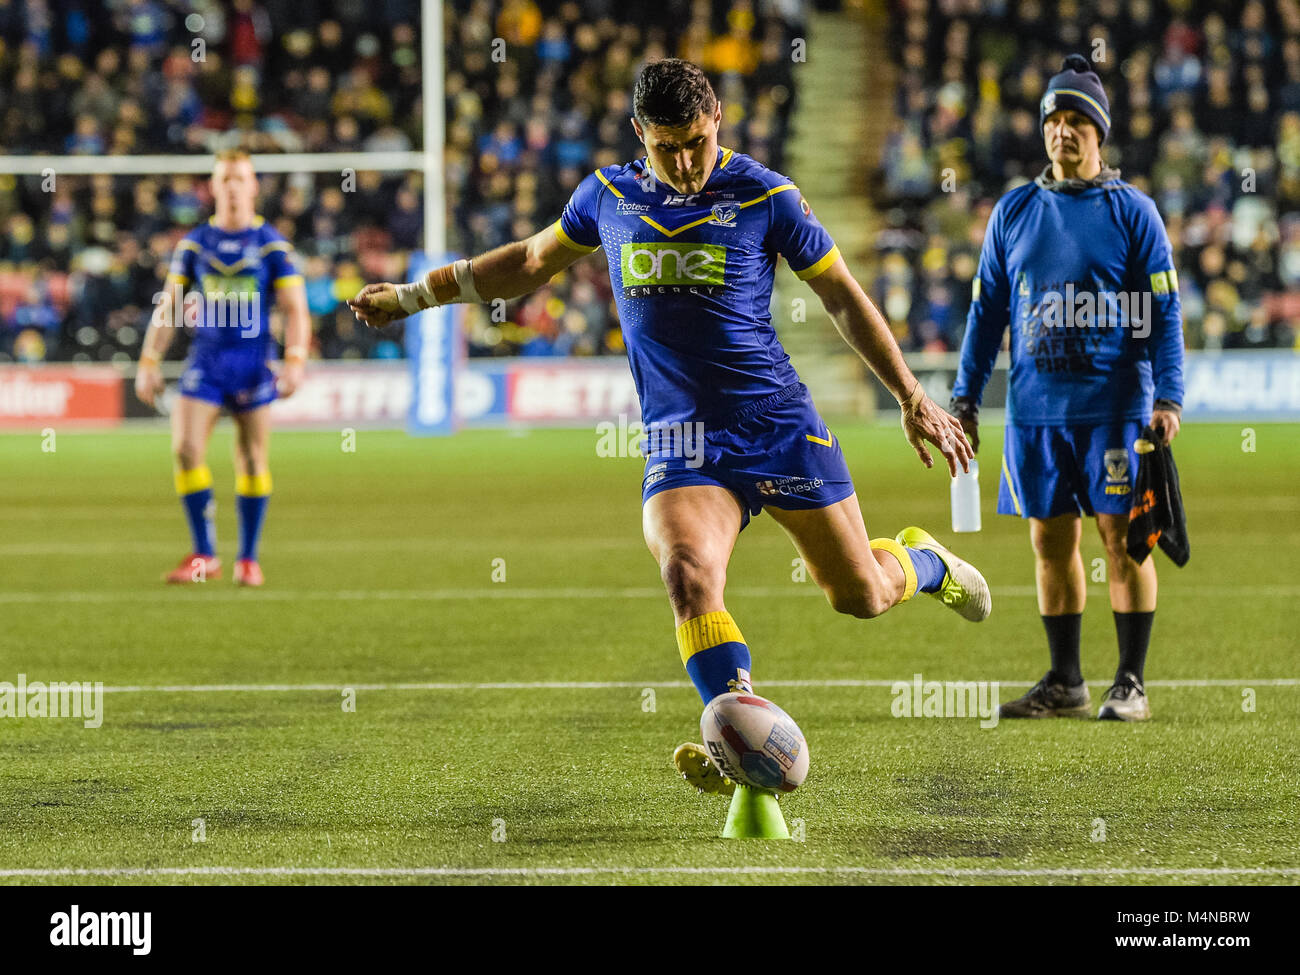 Widnes, UK. 16th Feb, 2018. Warrington Wolves Bryson Goodwin converts during the Betfred Super League game between Widnes Vikings and Warrington Wolves on Friday 16th Feb 2018 at the Select Security Stadium Credit: News Images/Alamy Live News Stock Photo